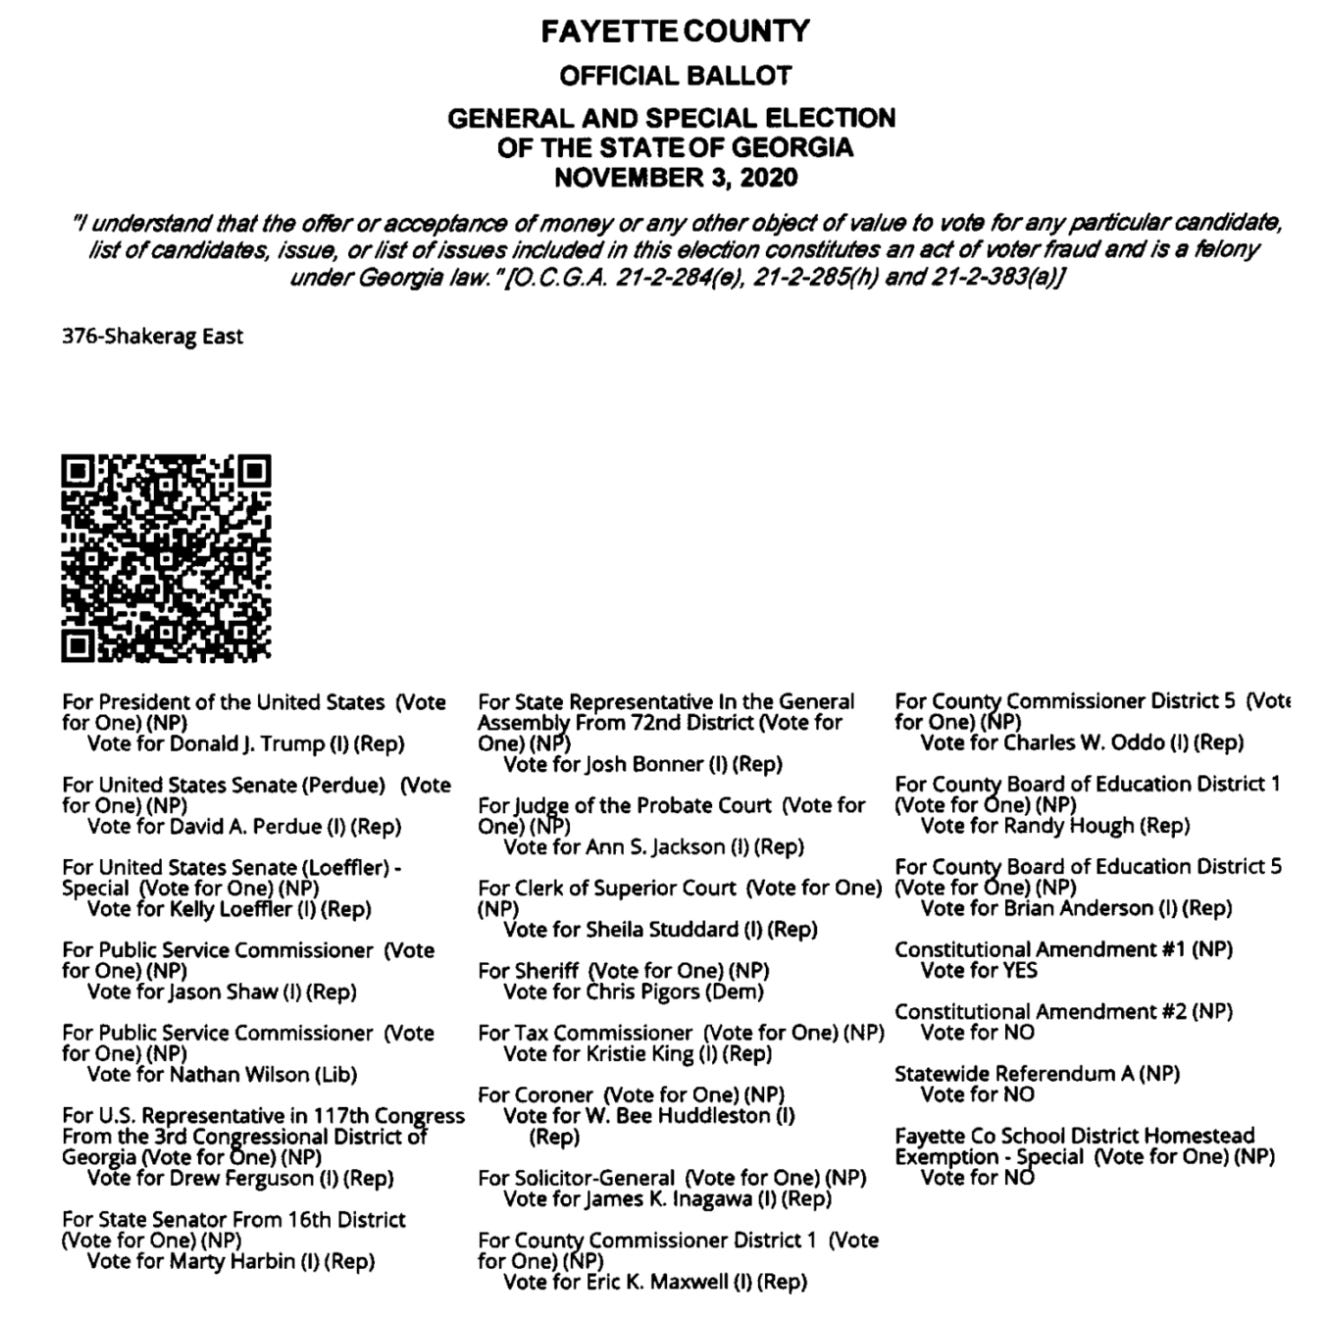 A document with a qr code

Description automatically generated with low confidence